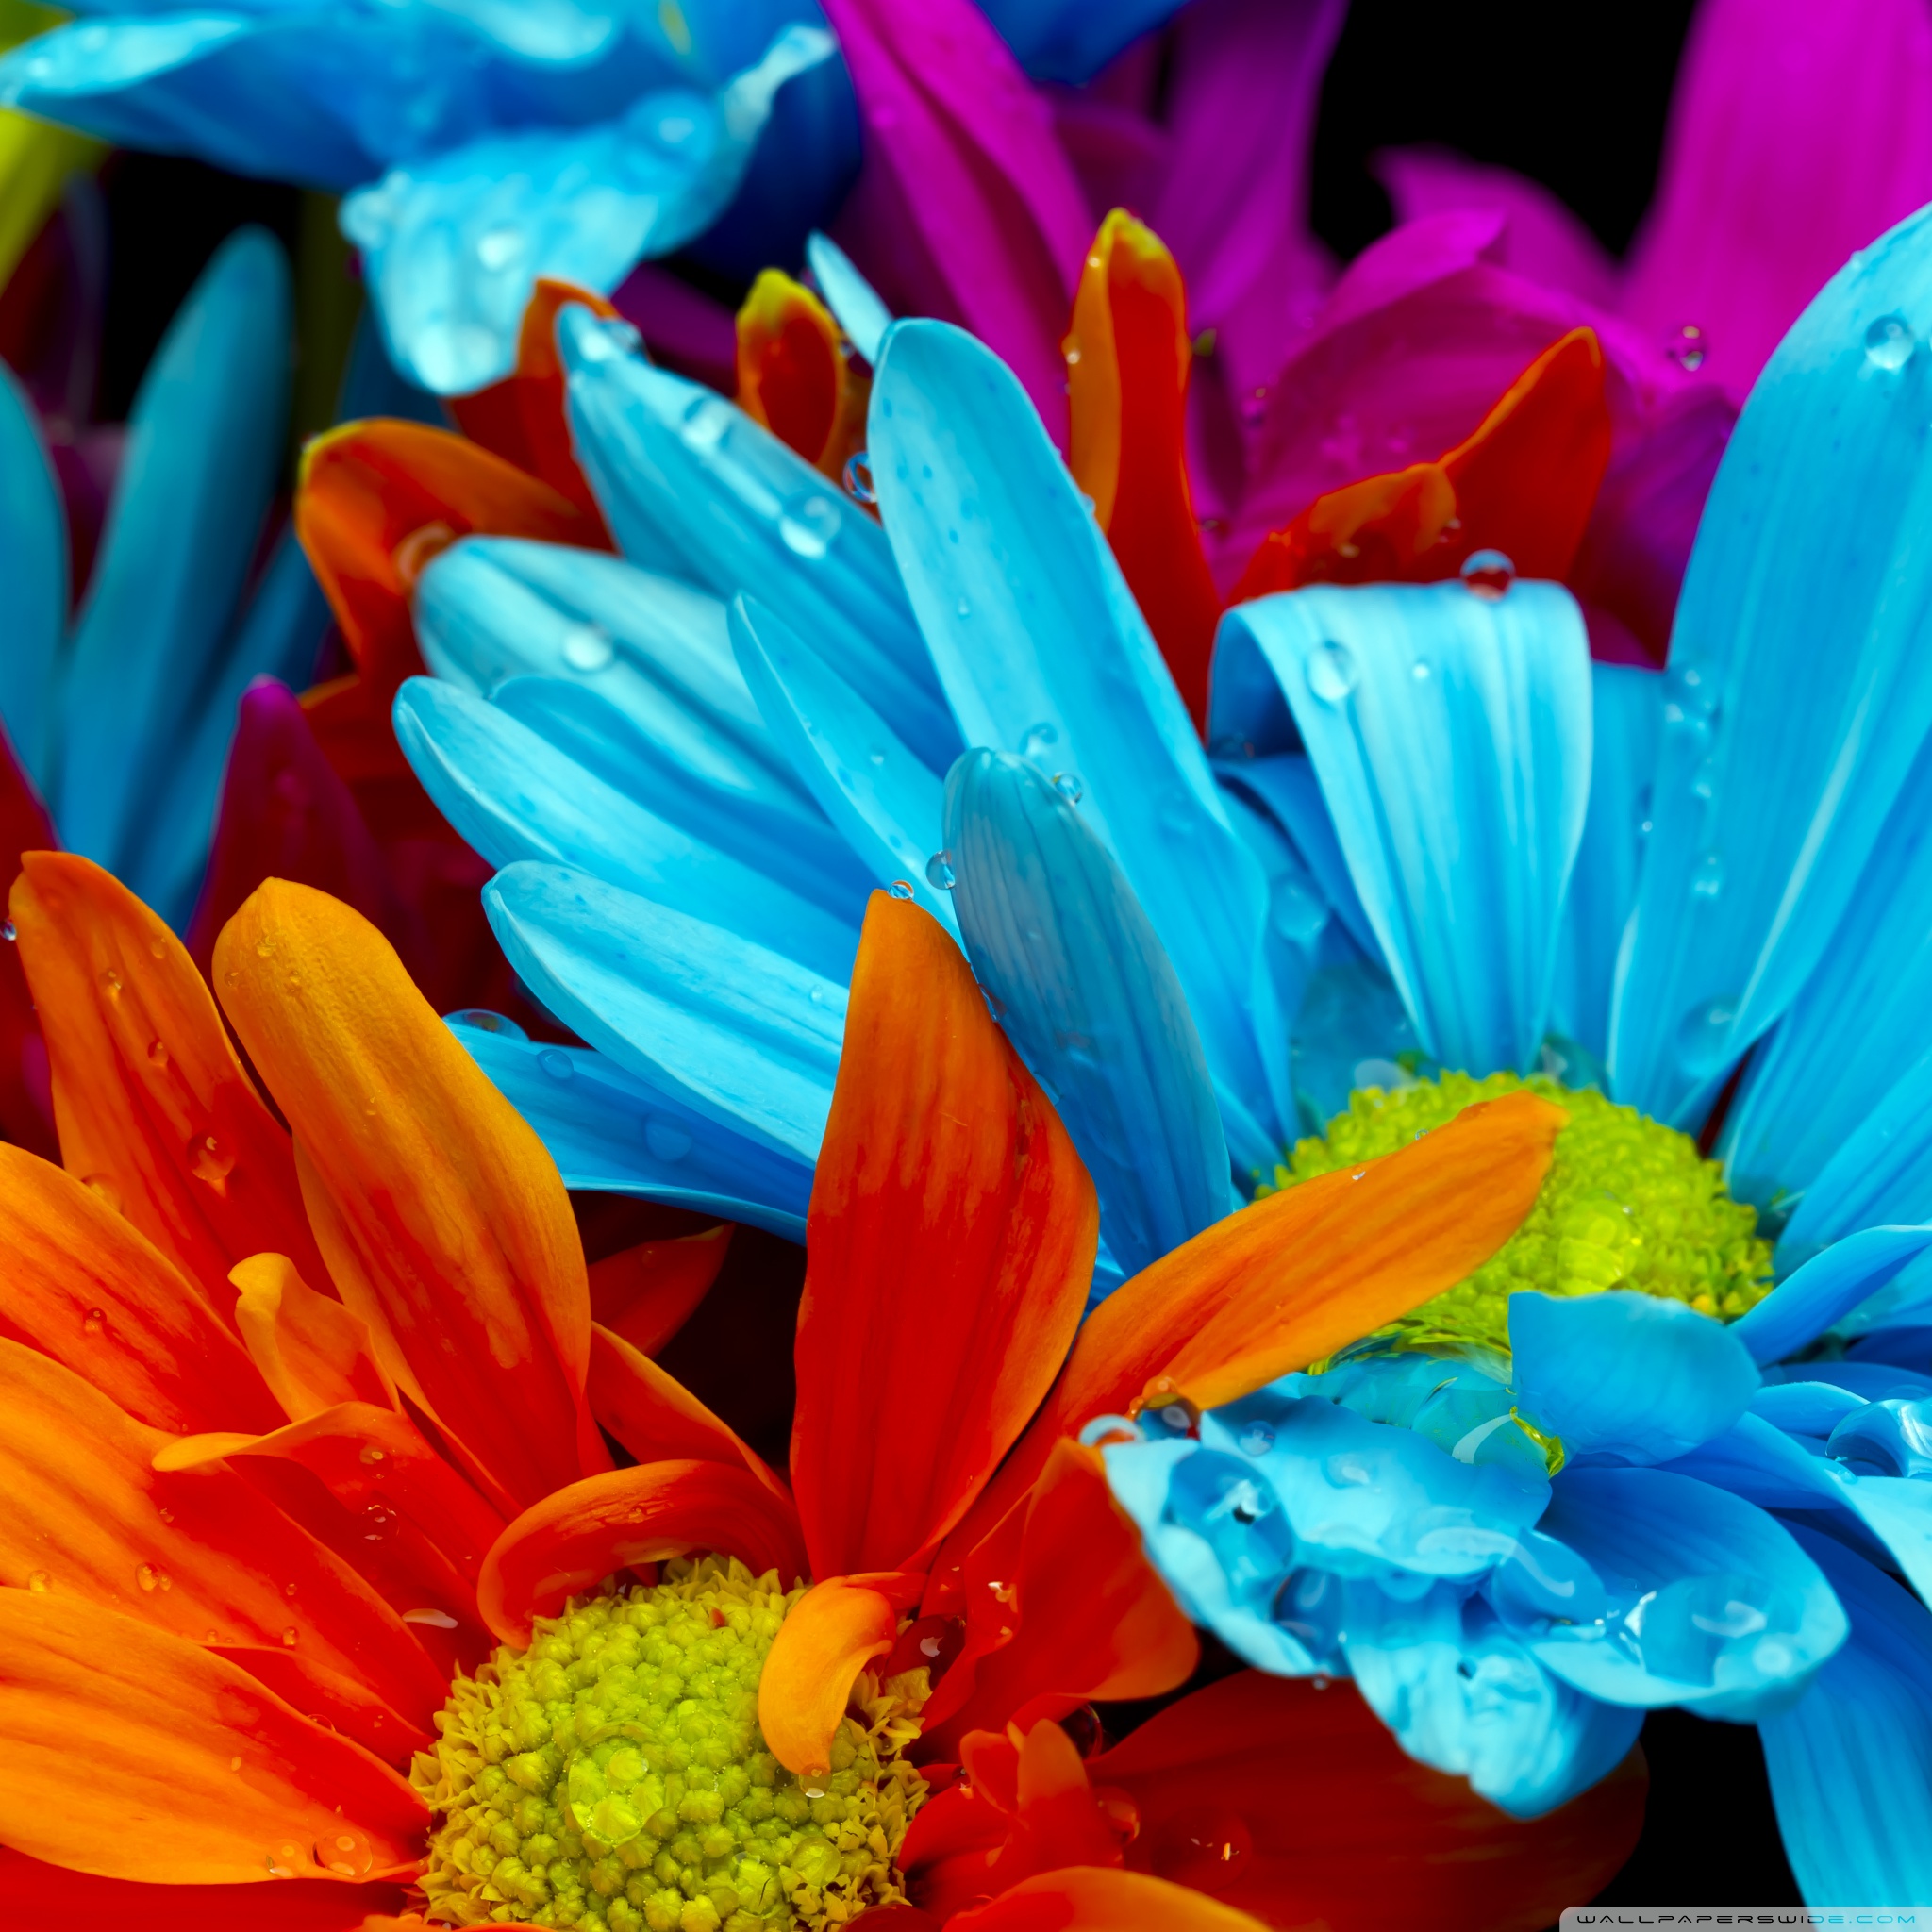 Ipad - Red Orange And Blue Flowers , HD Wallpaper & Backgrounds